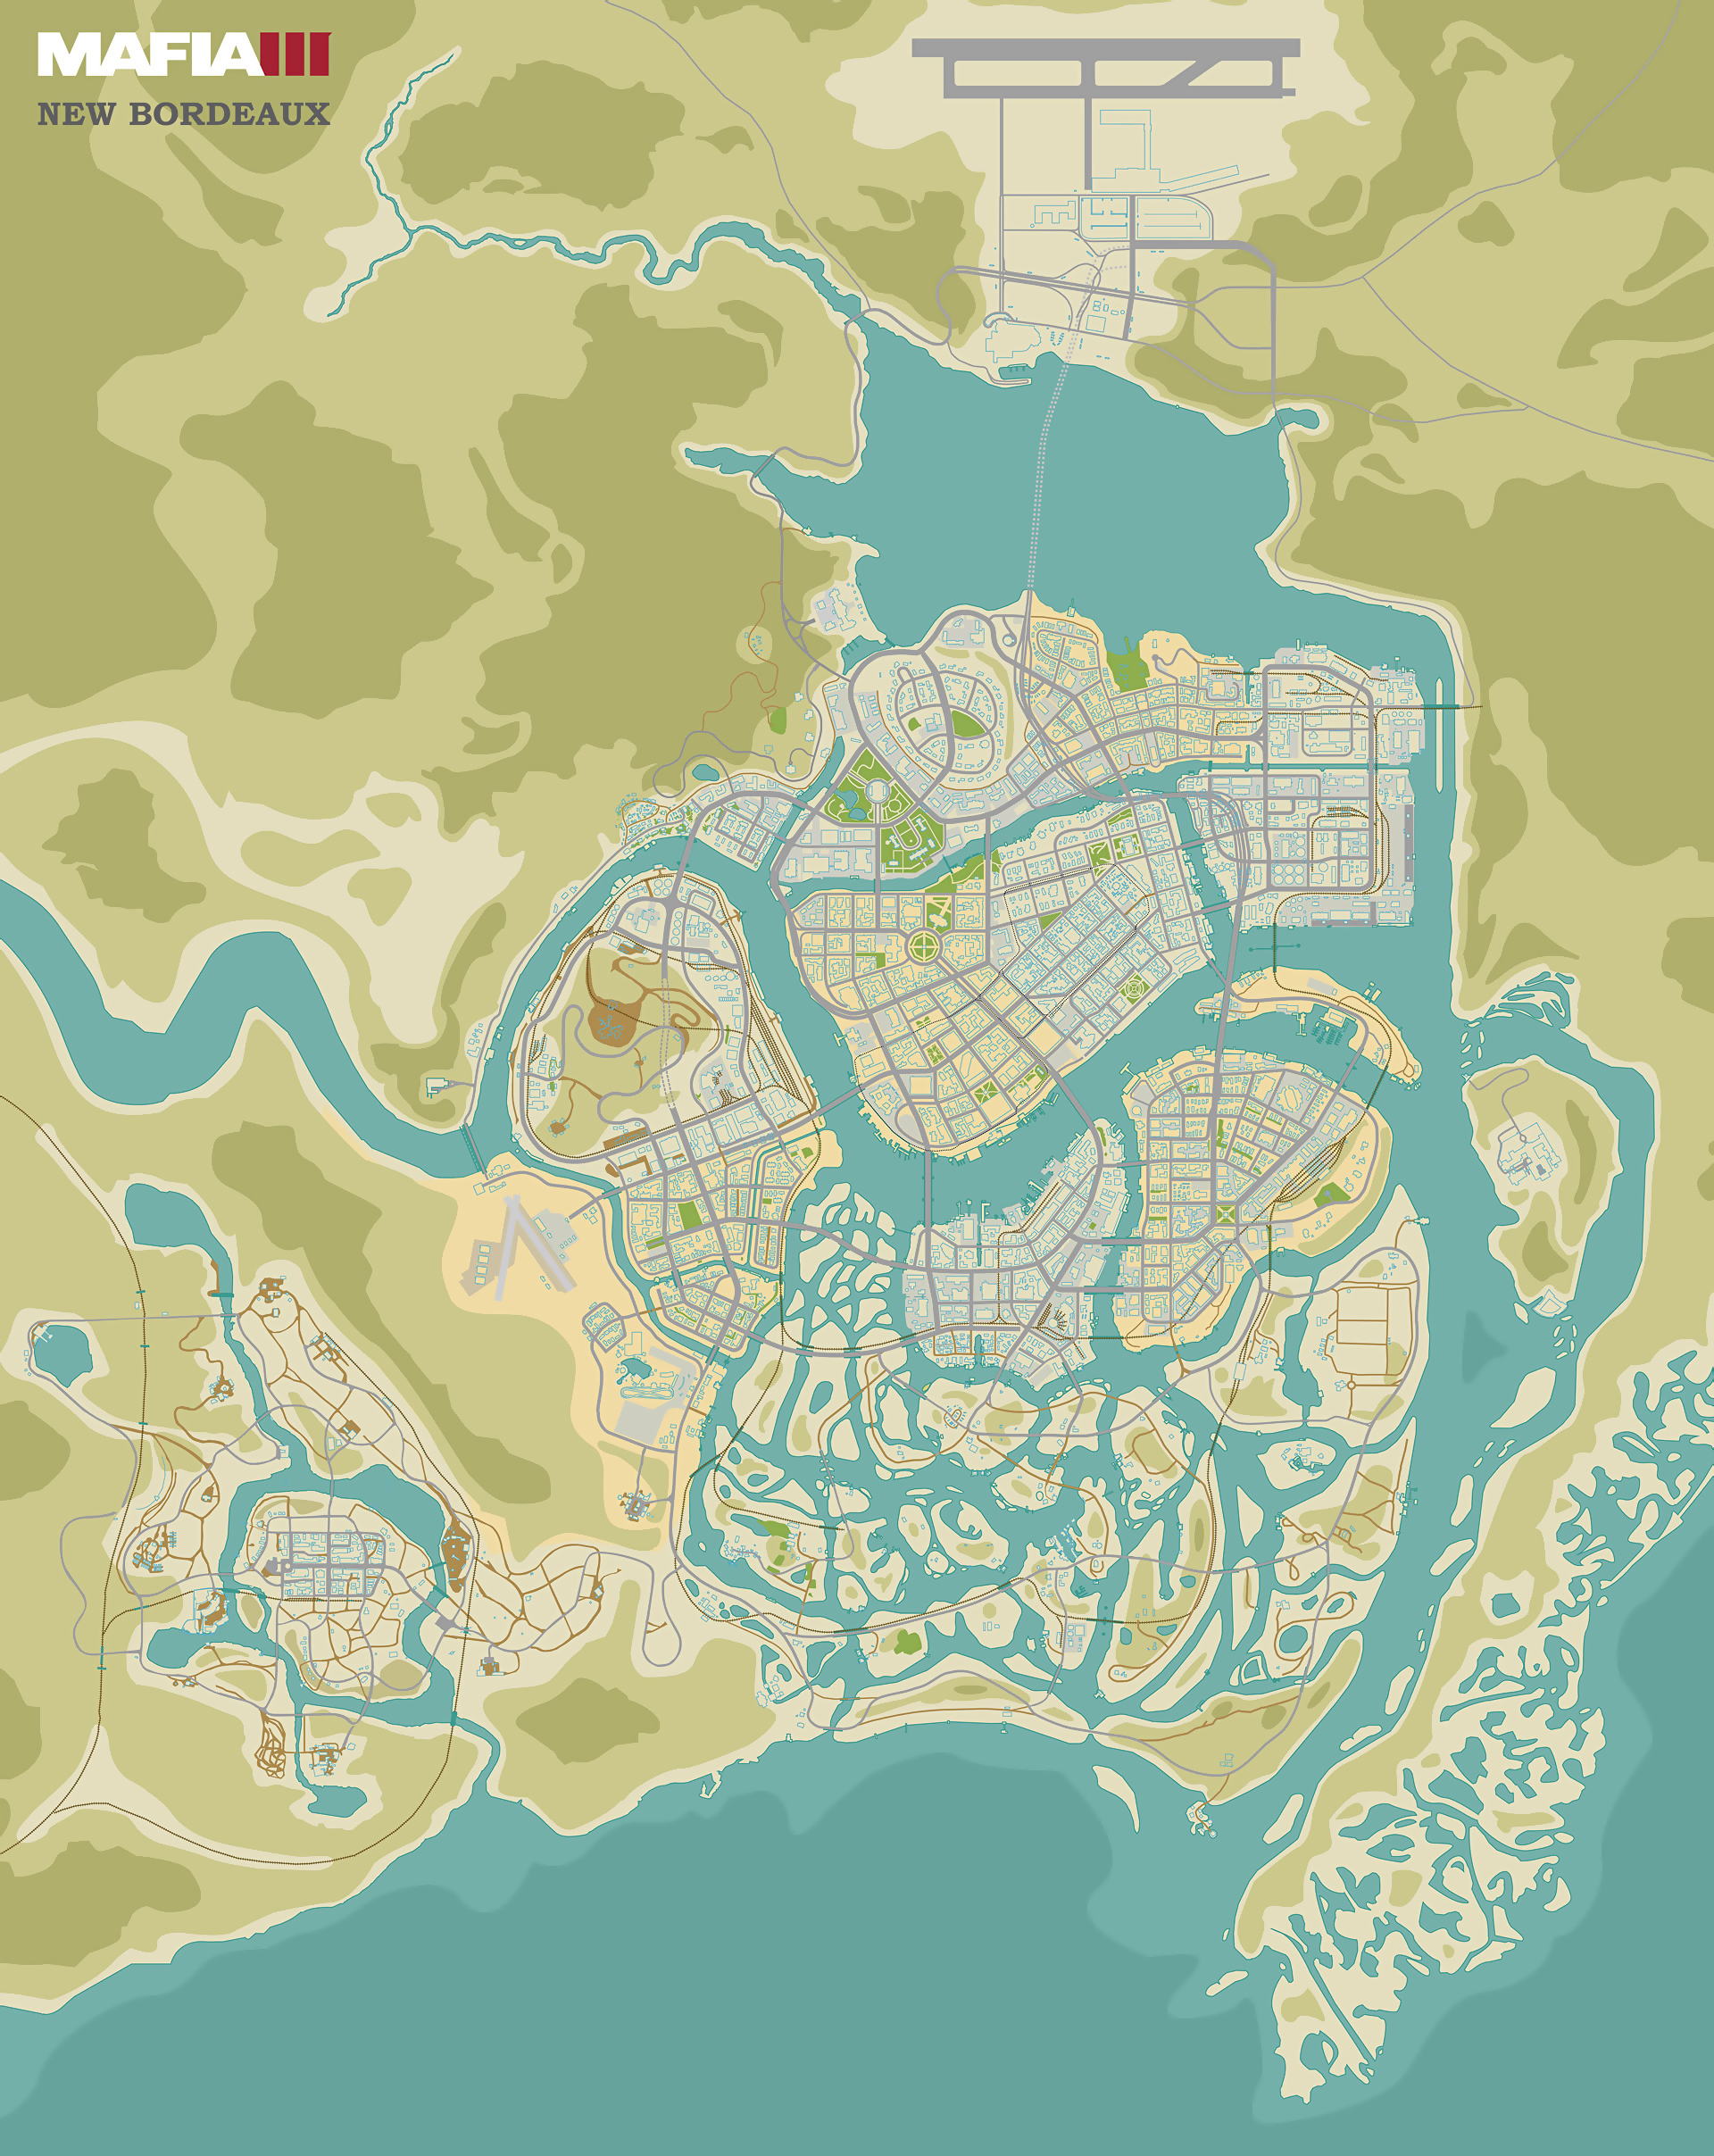 Large detailed map of Fallout 3, Games, Mapsland